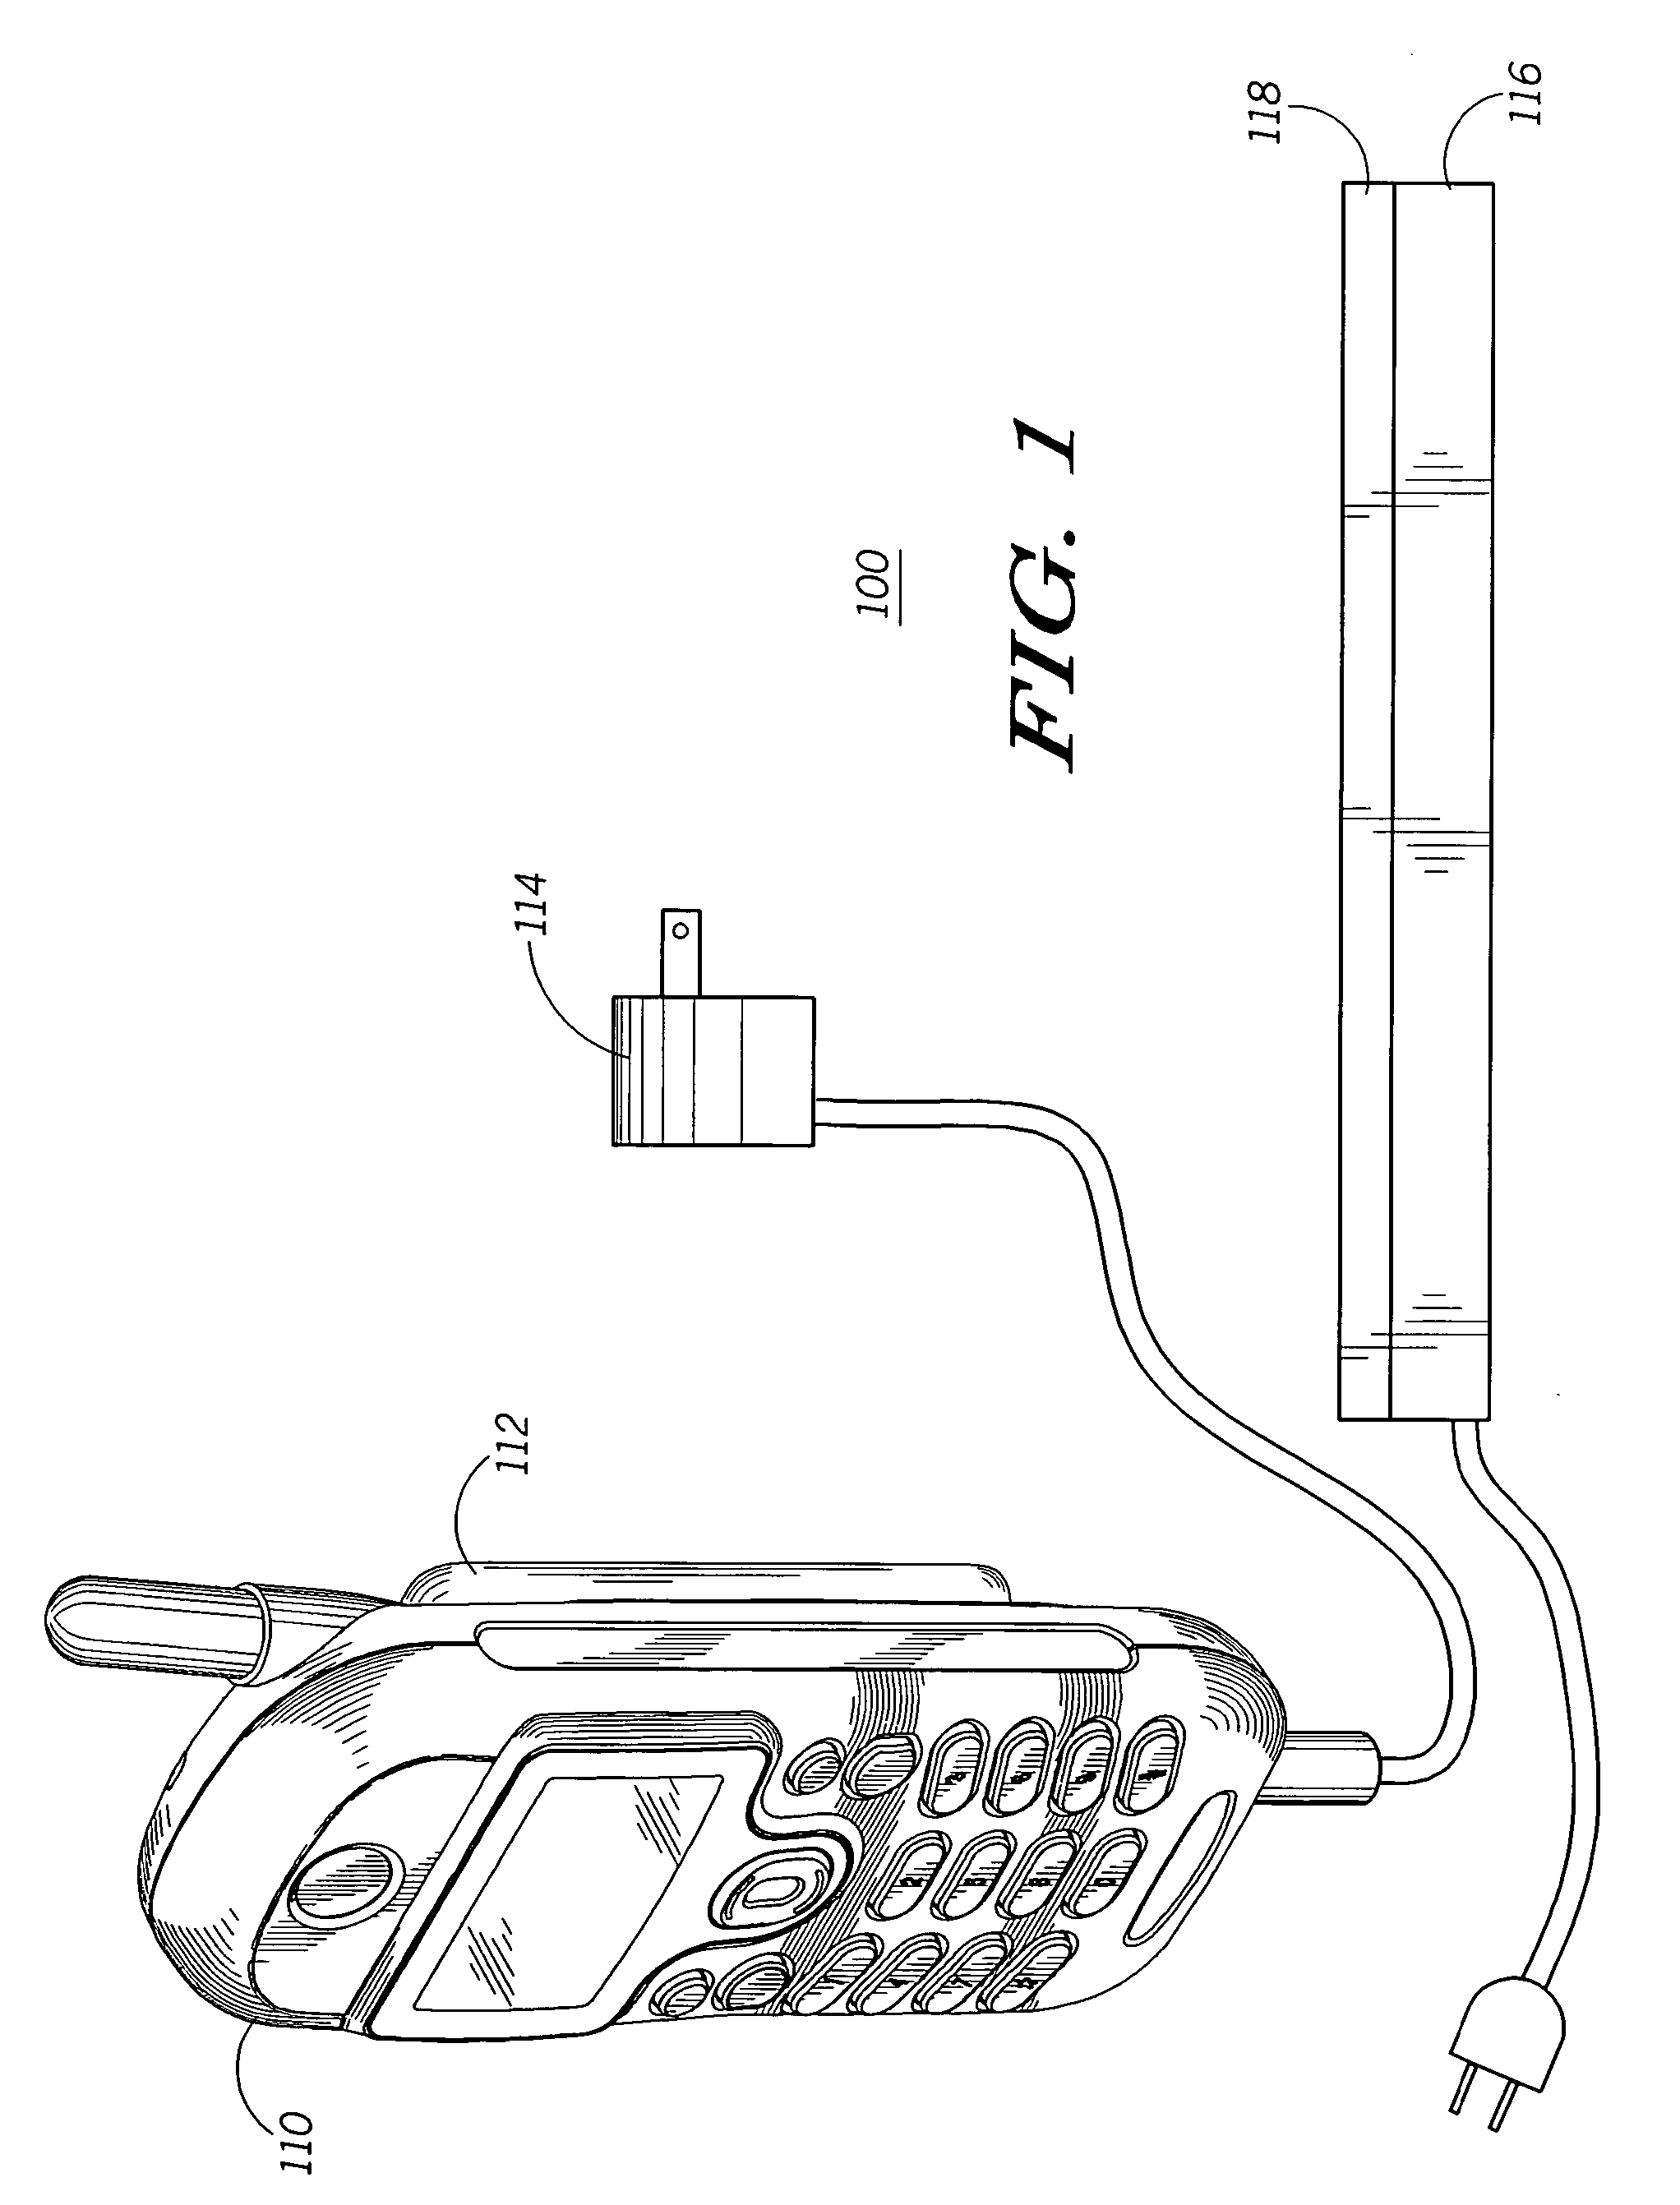 Method and system for selectively charging a battery